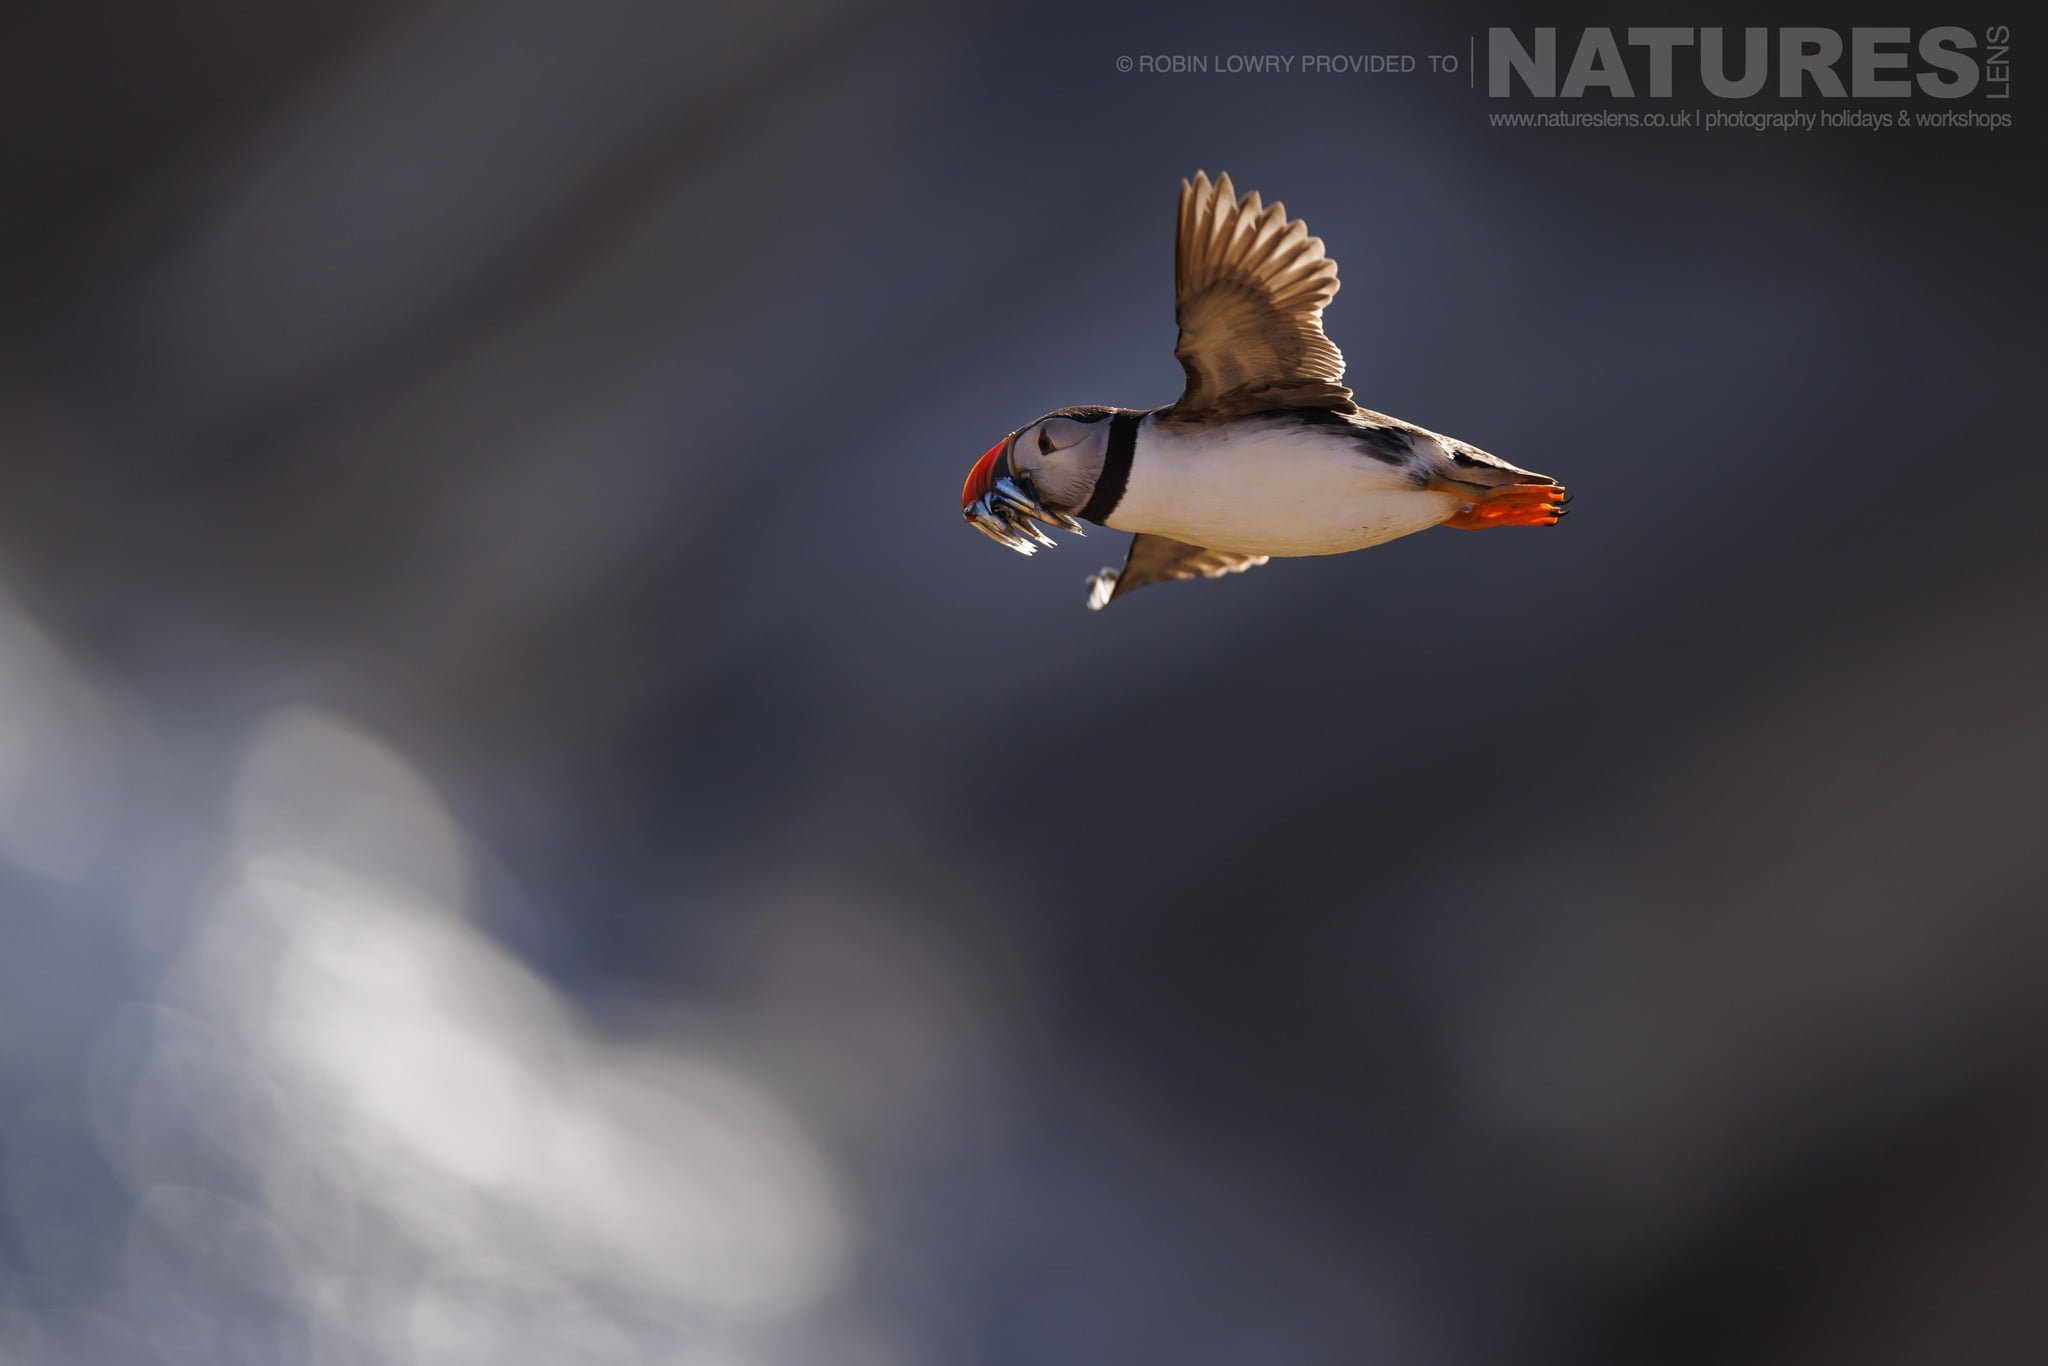 One of the Puffins of Skomer flies past with a beak full of sand eels - this image was captured during the NaturesLens Comical Puffins of Skomer Island photography holiday